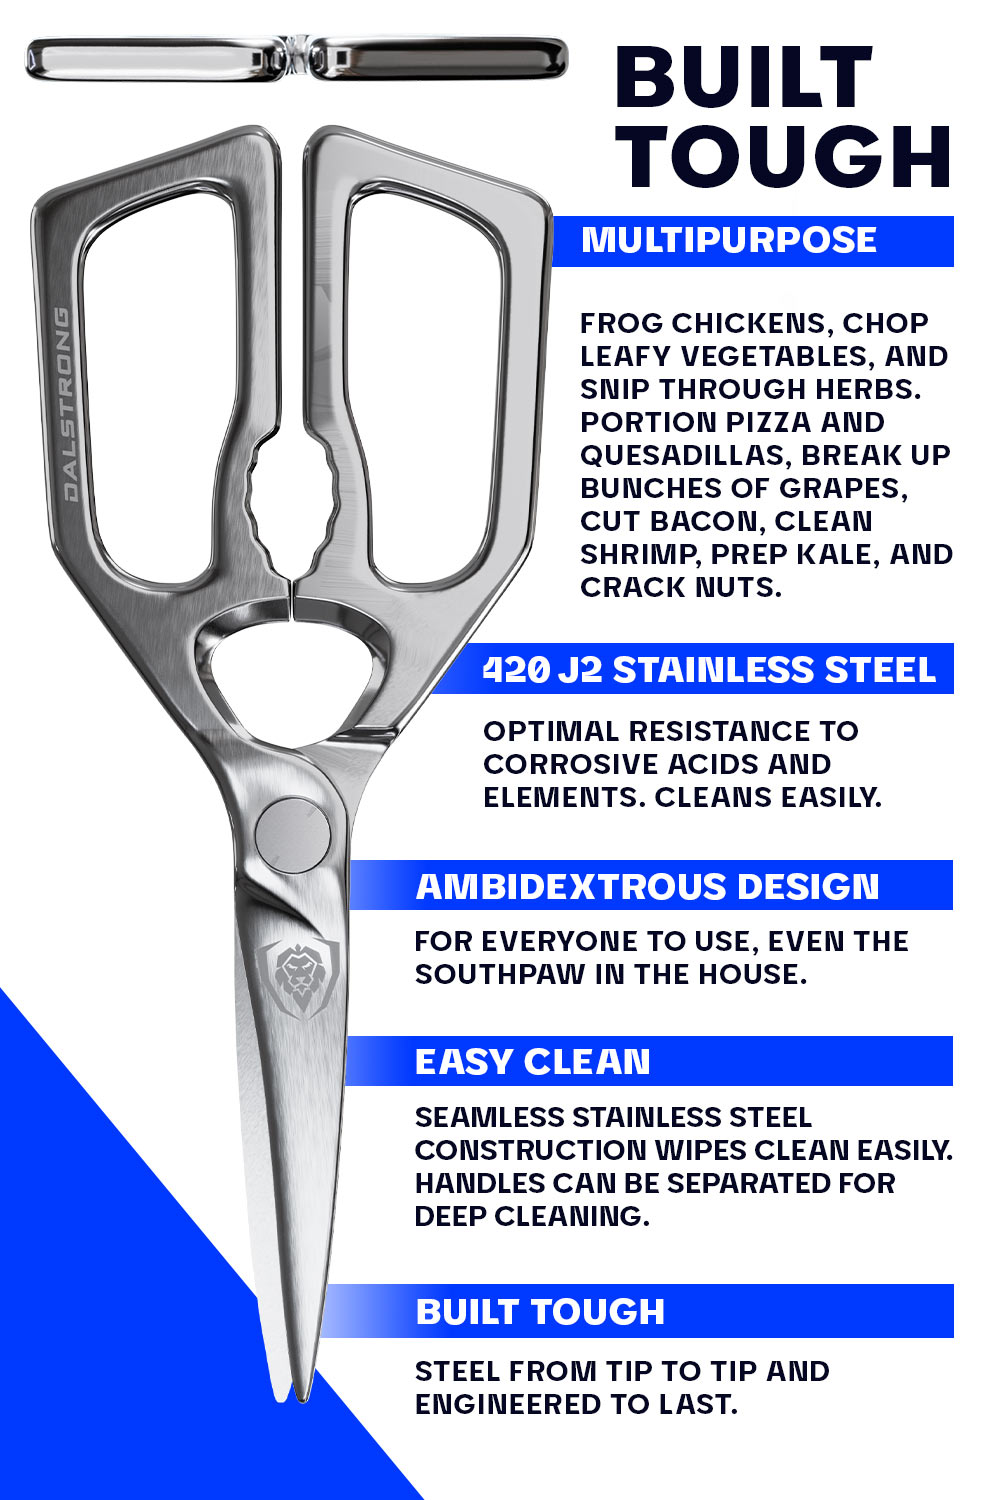 Dalstrong Premium Rust Eraser - Knife Maintenance and Care - for Knives, Scissors, Steel Pots and Pans, Whetstones, and More - Calcium Carbonate